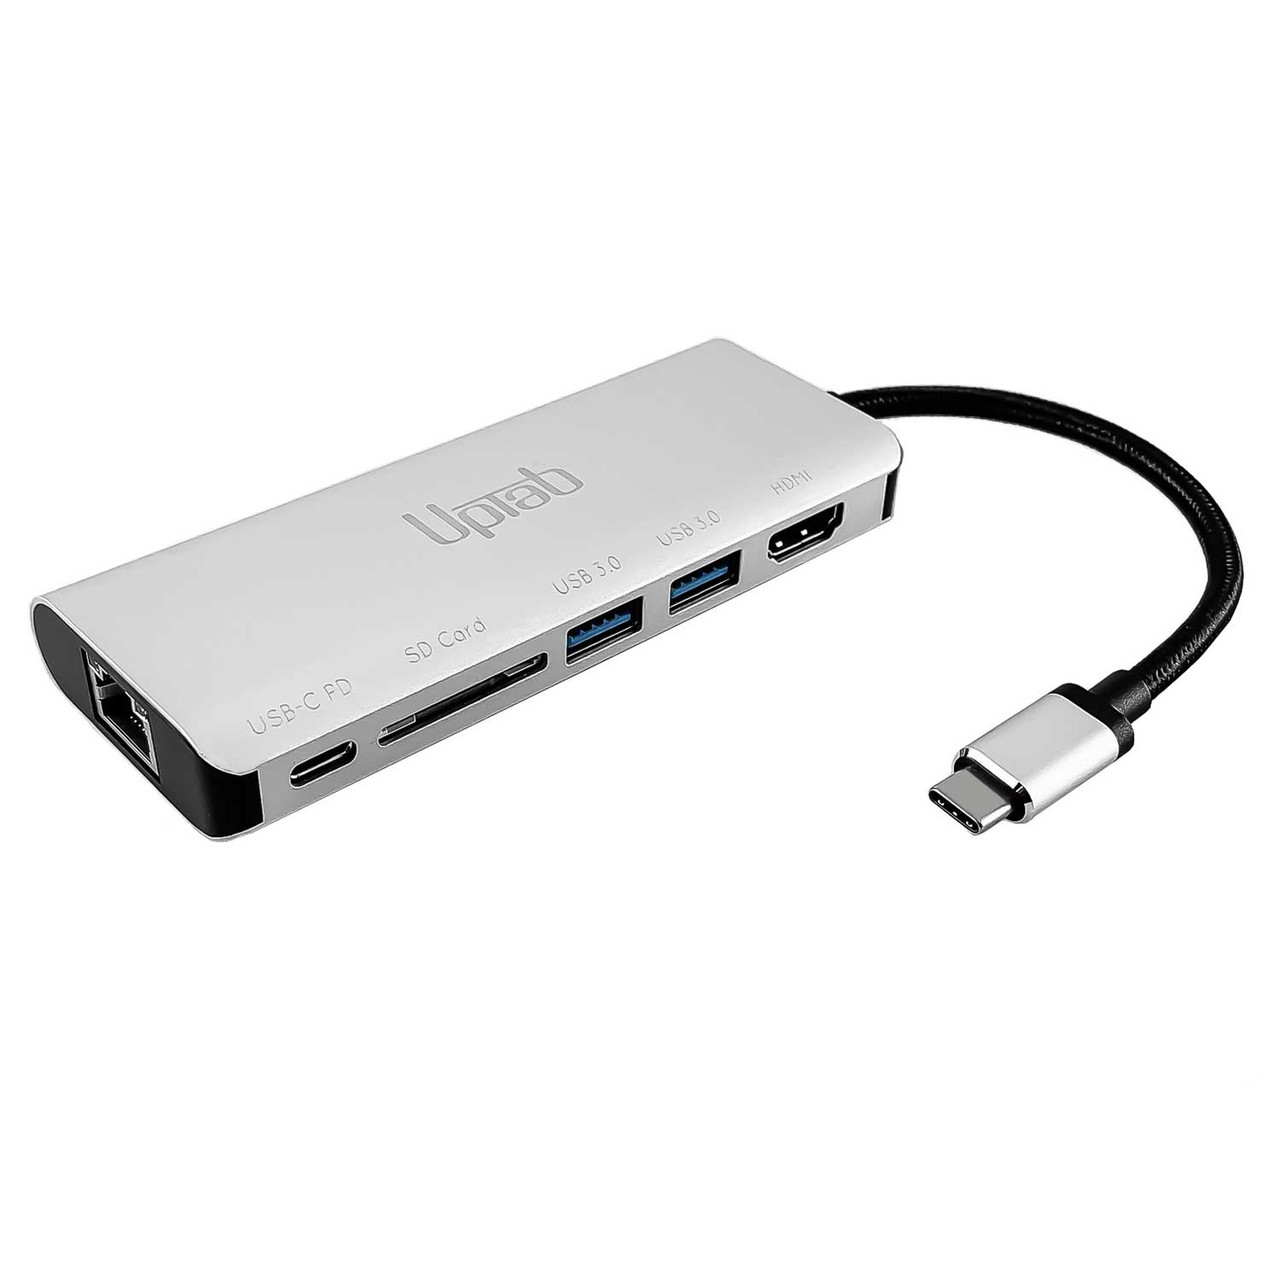 USB-C to HDMI 4K, 2 USB 3.0, Card Reader, USB-C PD and Gigabit Ethernet  Adapter